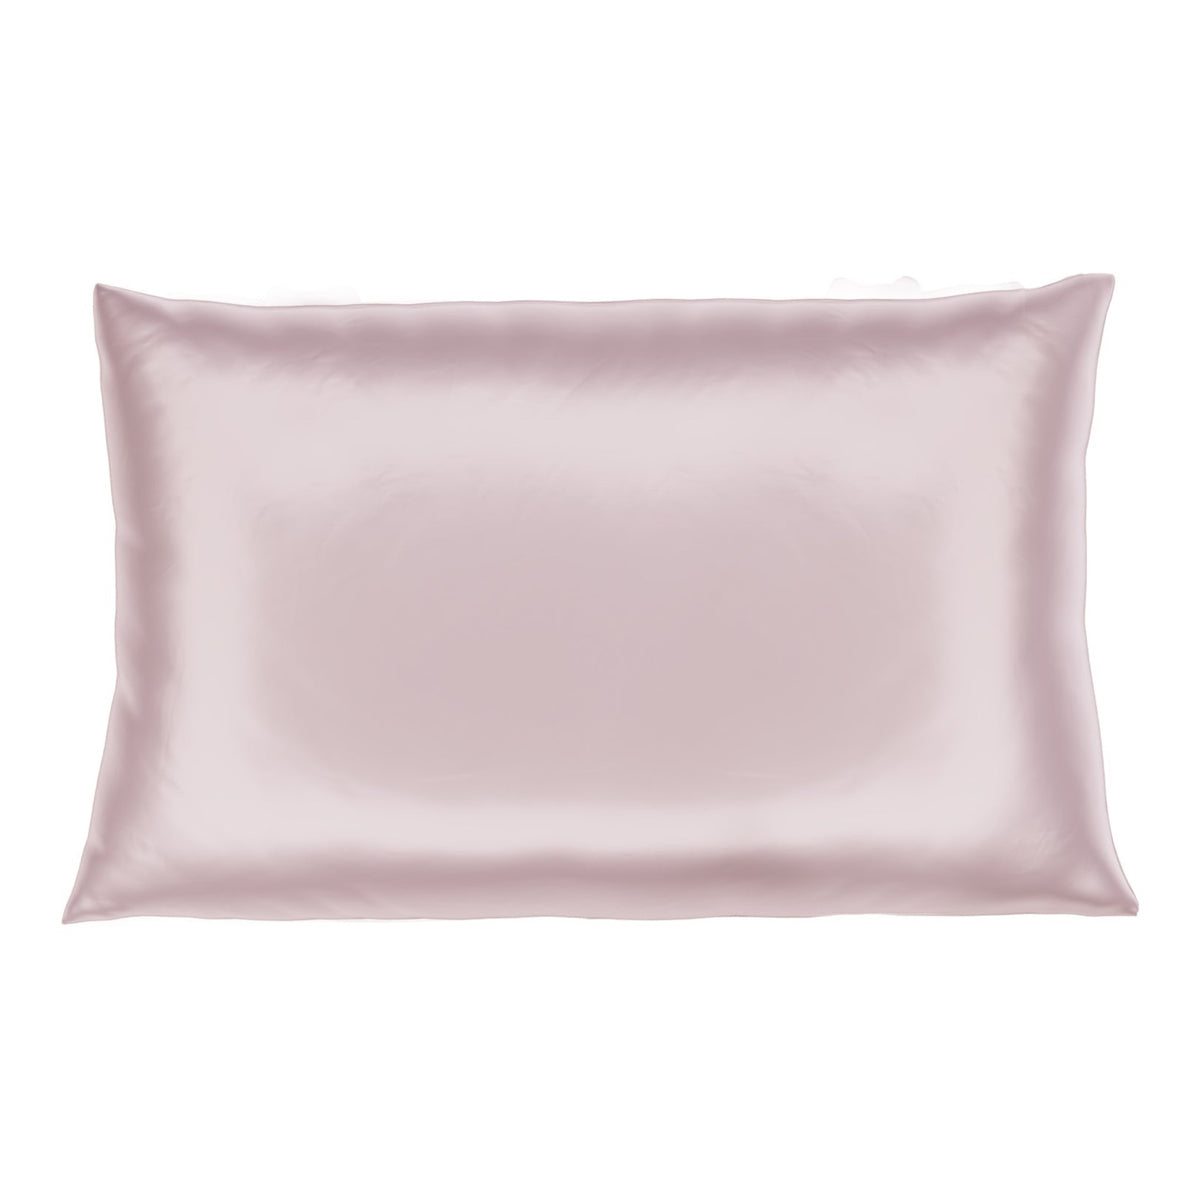 Mulberry Park Silks Deluxe 19 Momme Pure Silk Pillowcase in Pink Color